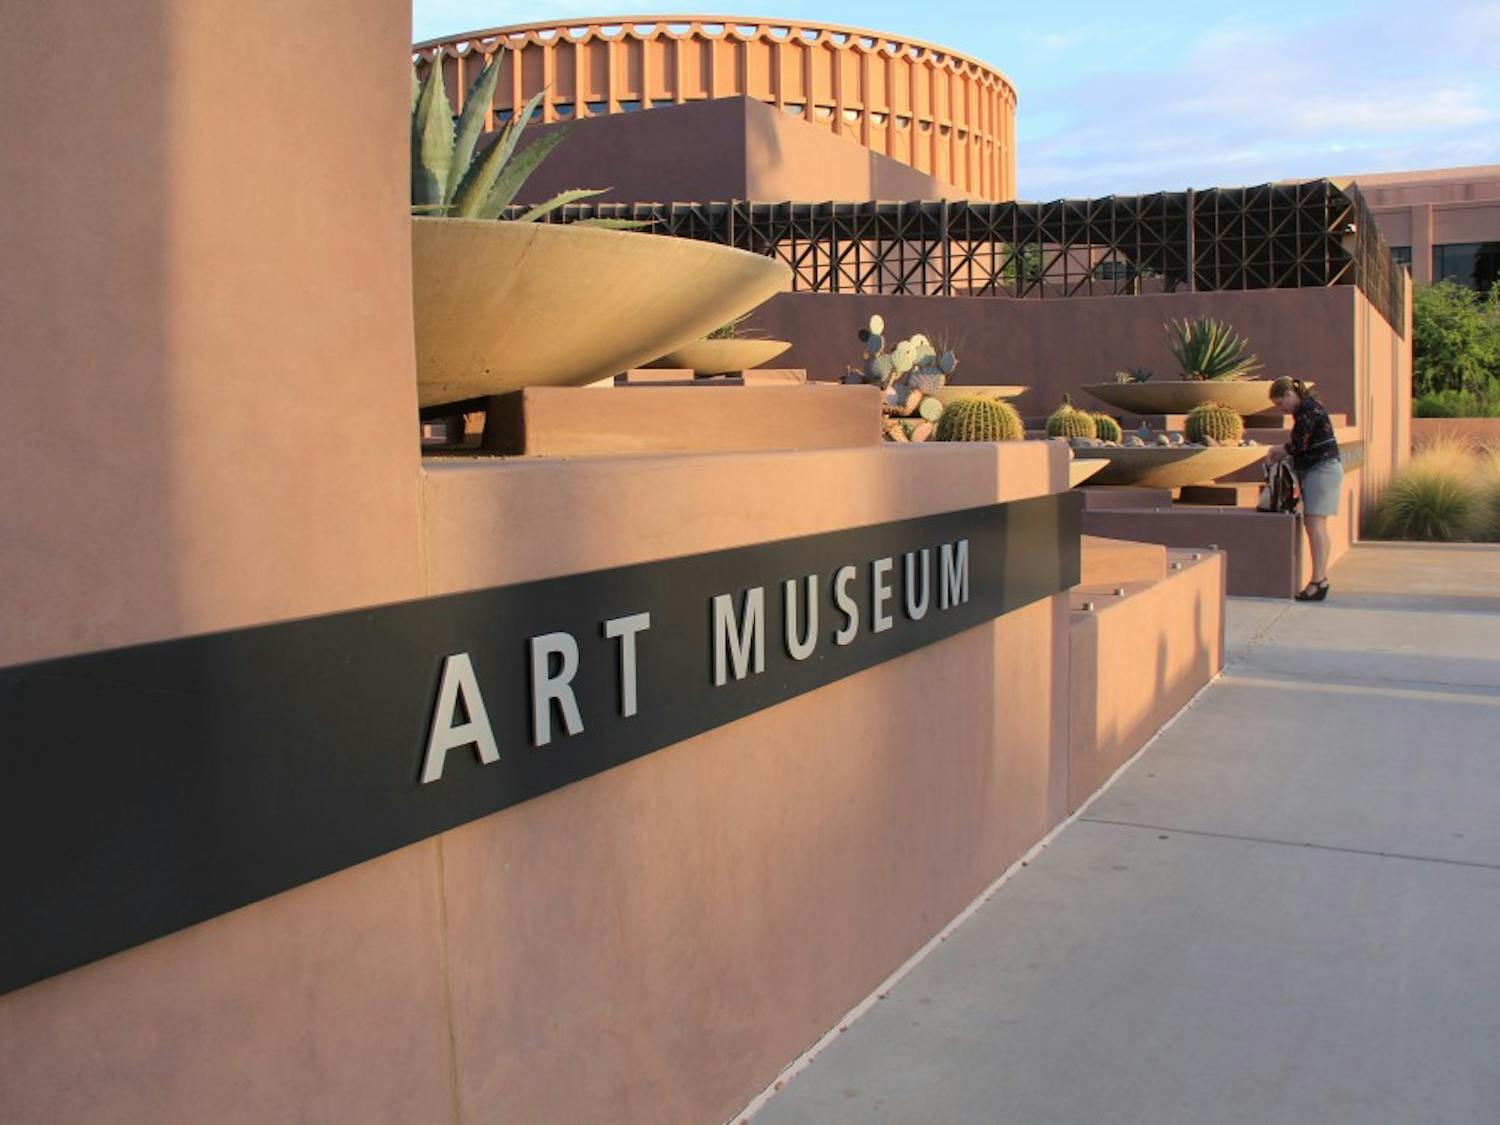 The ASU Art Museum front entrance, March 31, 2017.